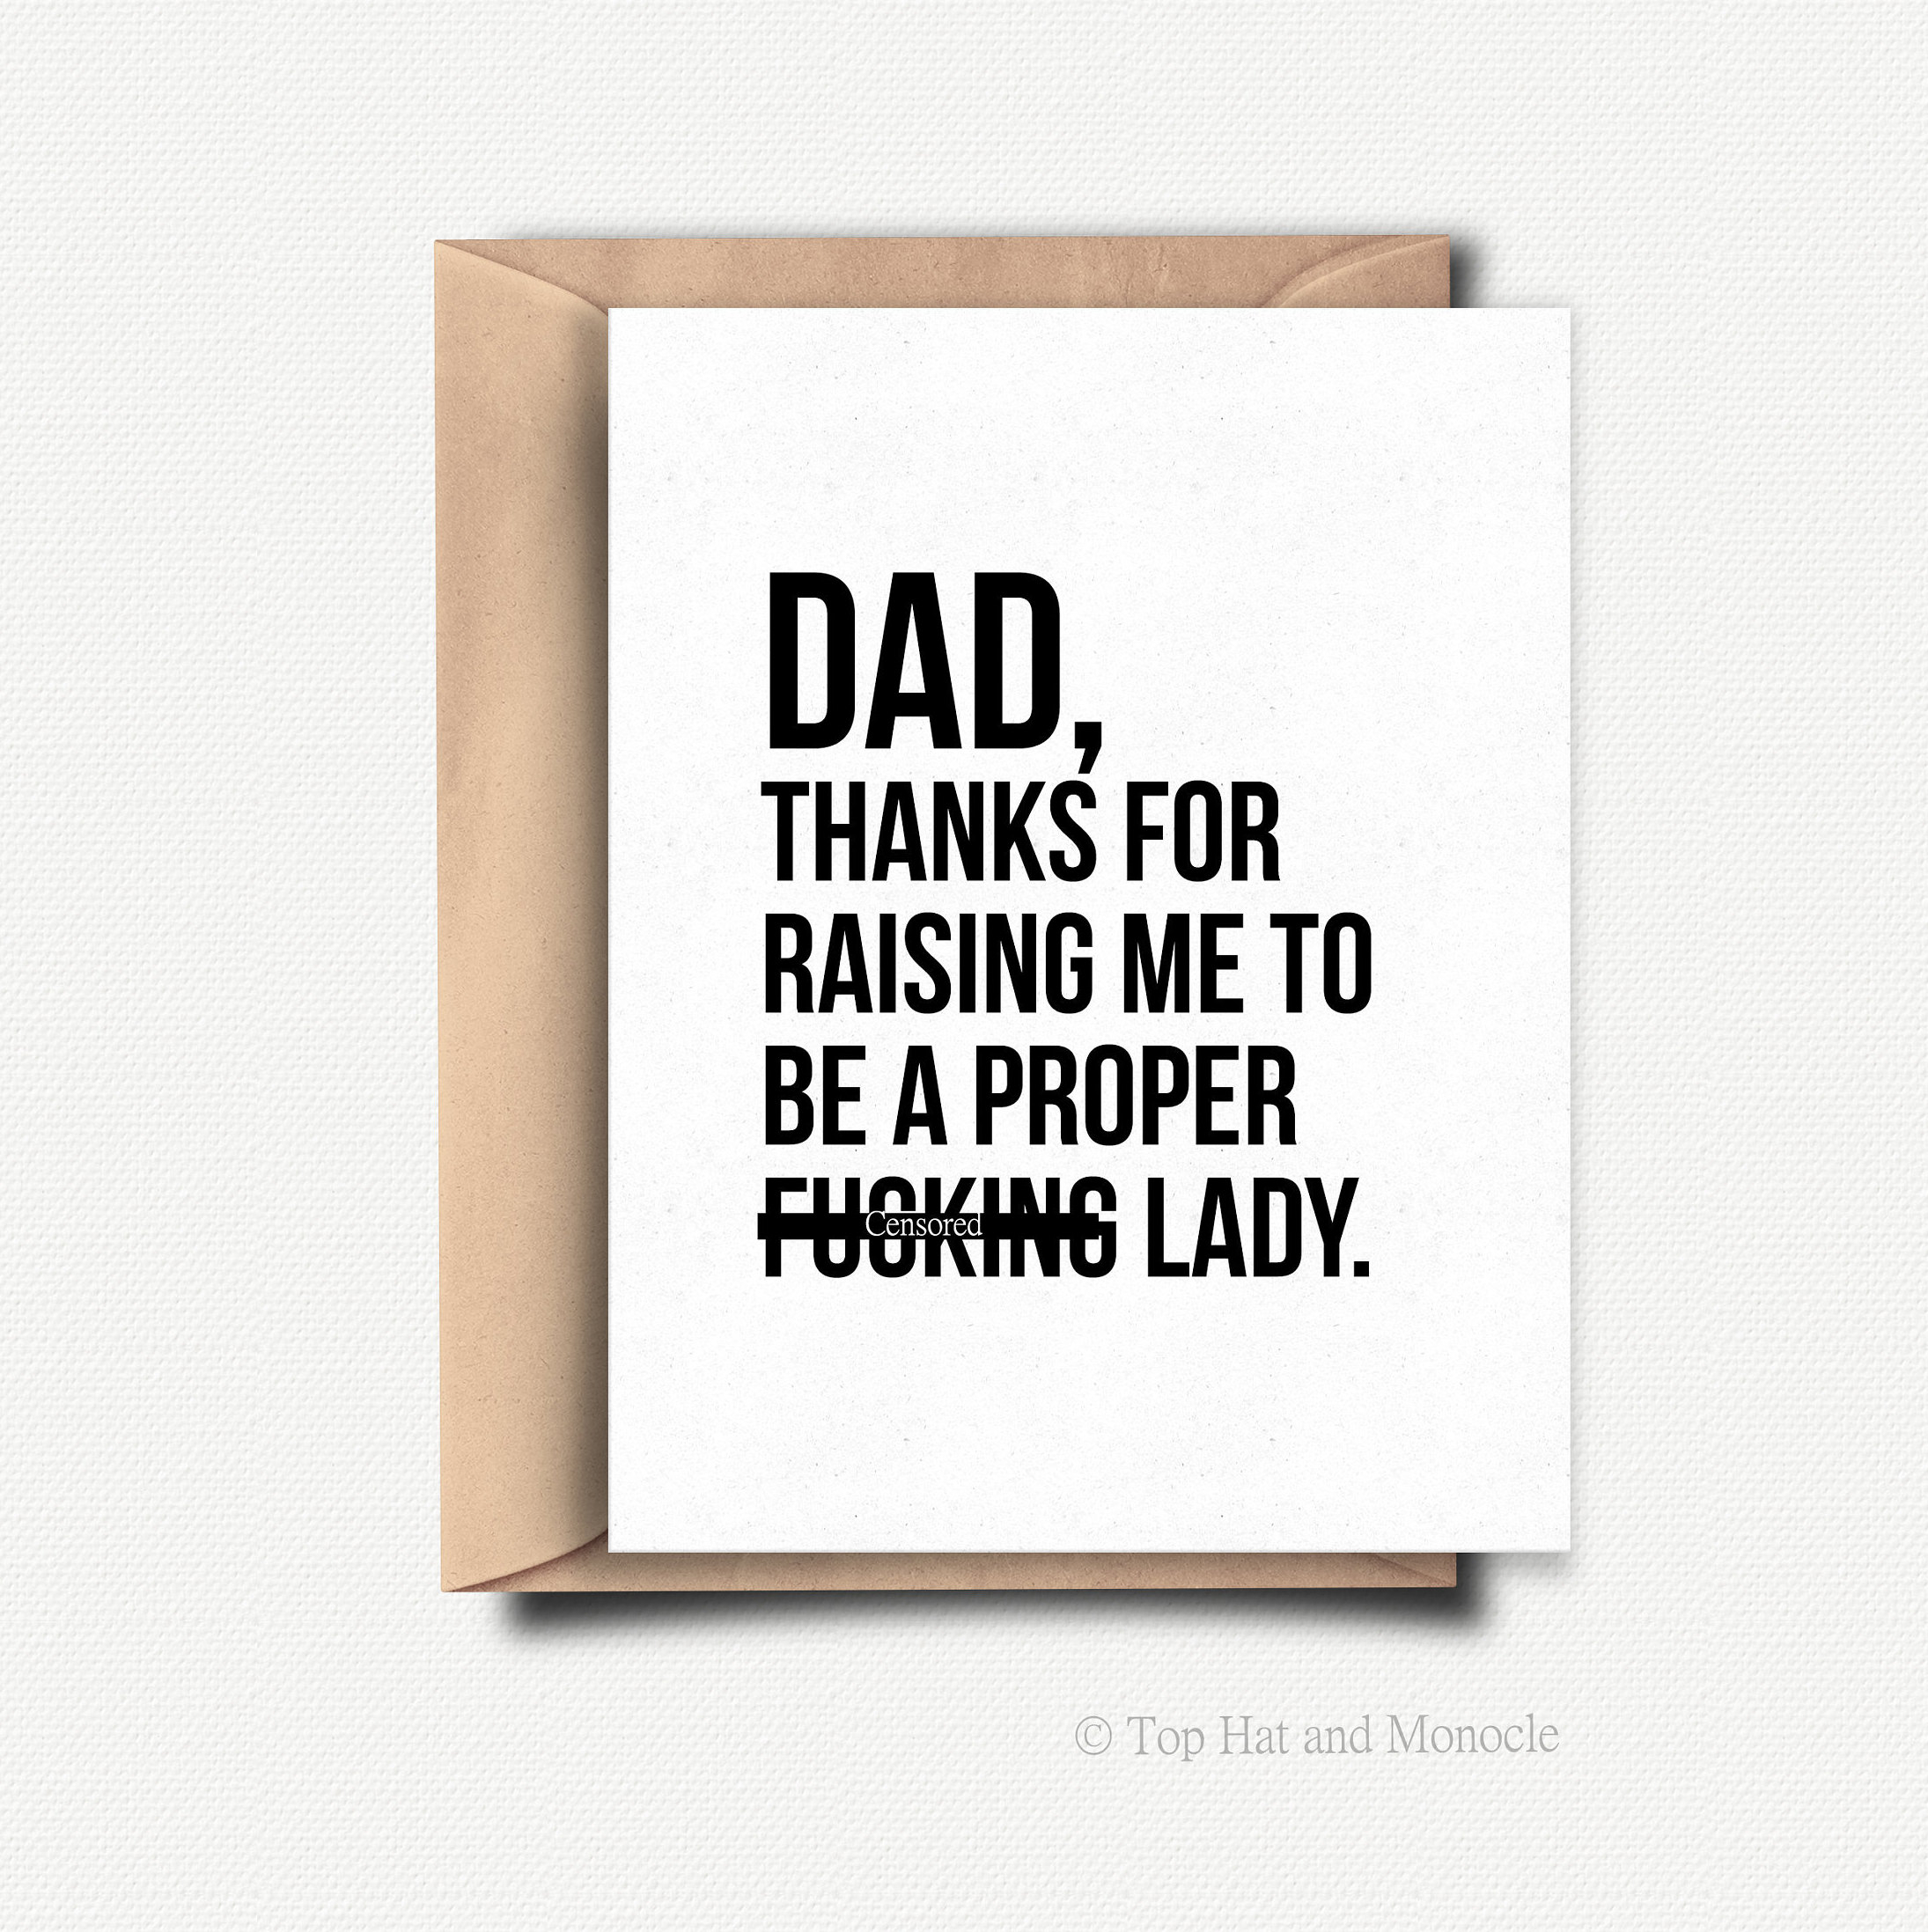 Birthday Card For Dad Ideas Funny Fathers Day Card Funny Fathers Day Gift From Daughter Funny Fathers Day Gift Ideas For Dad Birthday Card From Daughter Dad Card